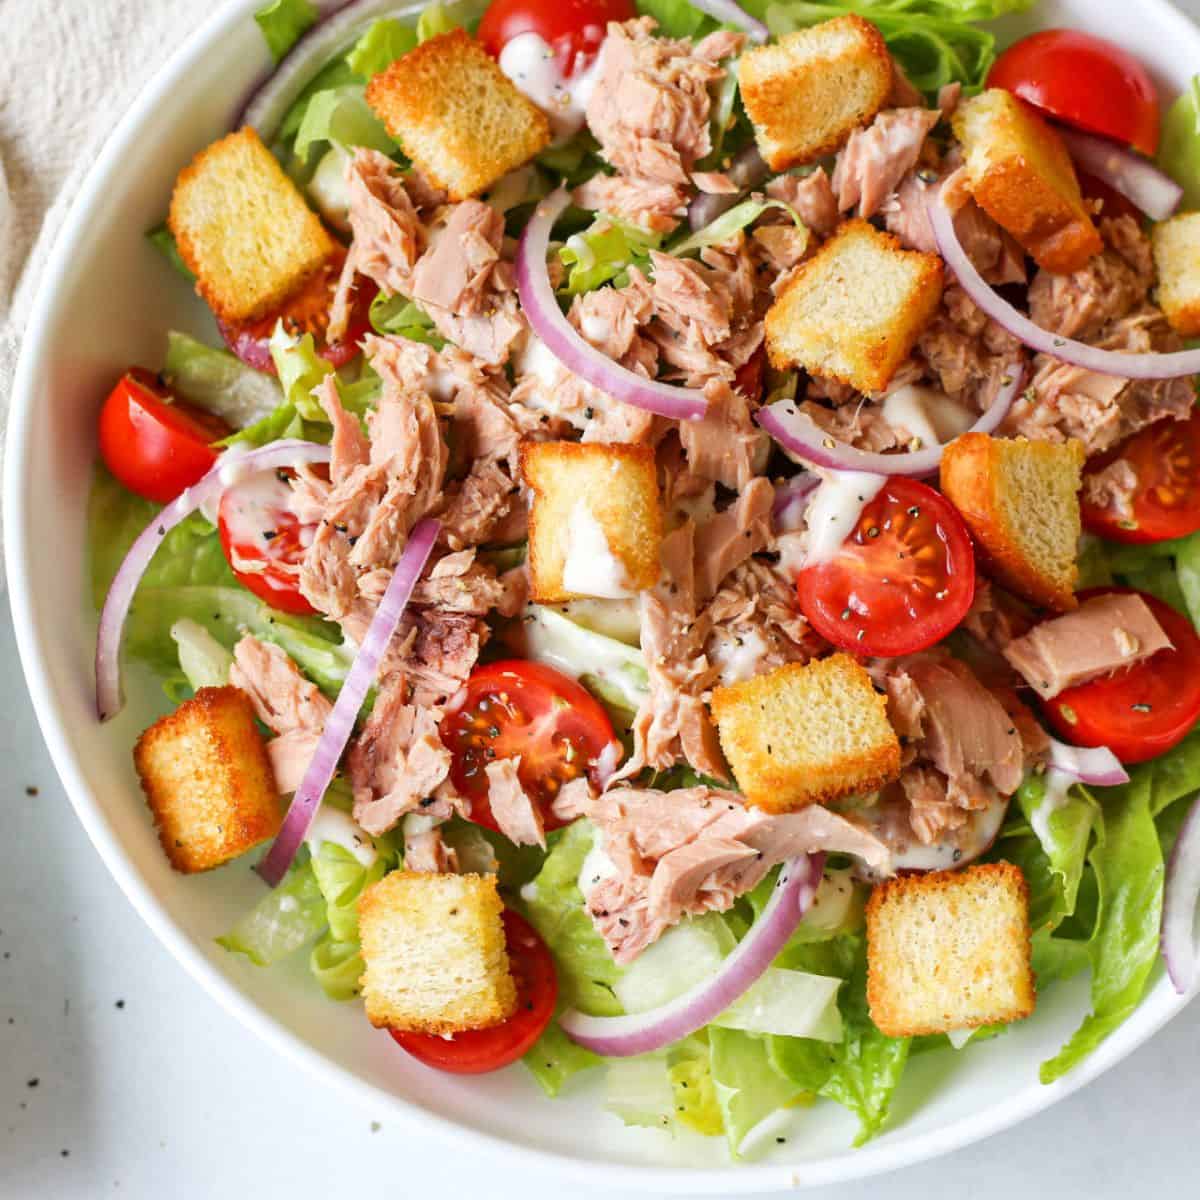 A white shallow dish with a salad made of chopped lettuce, halved cherry tomatoes, chunks of tune, sliced red onion and croutons.